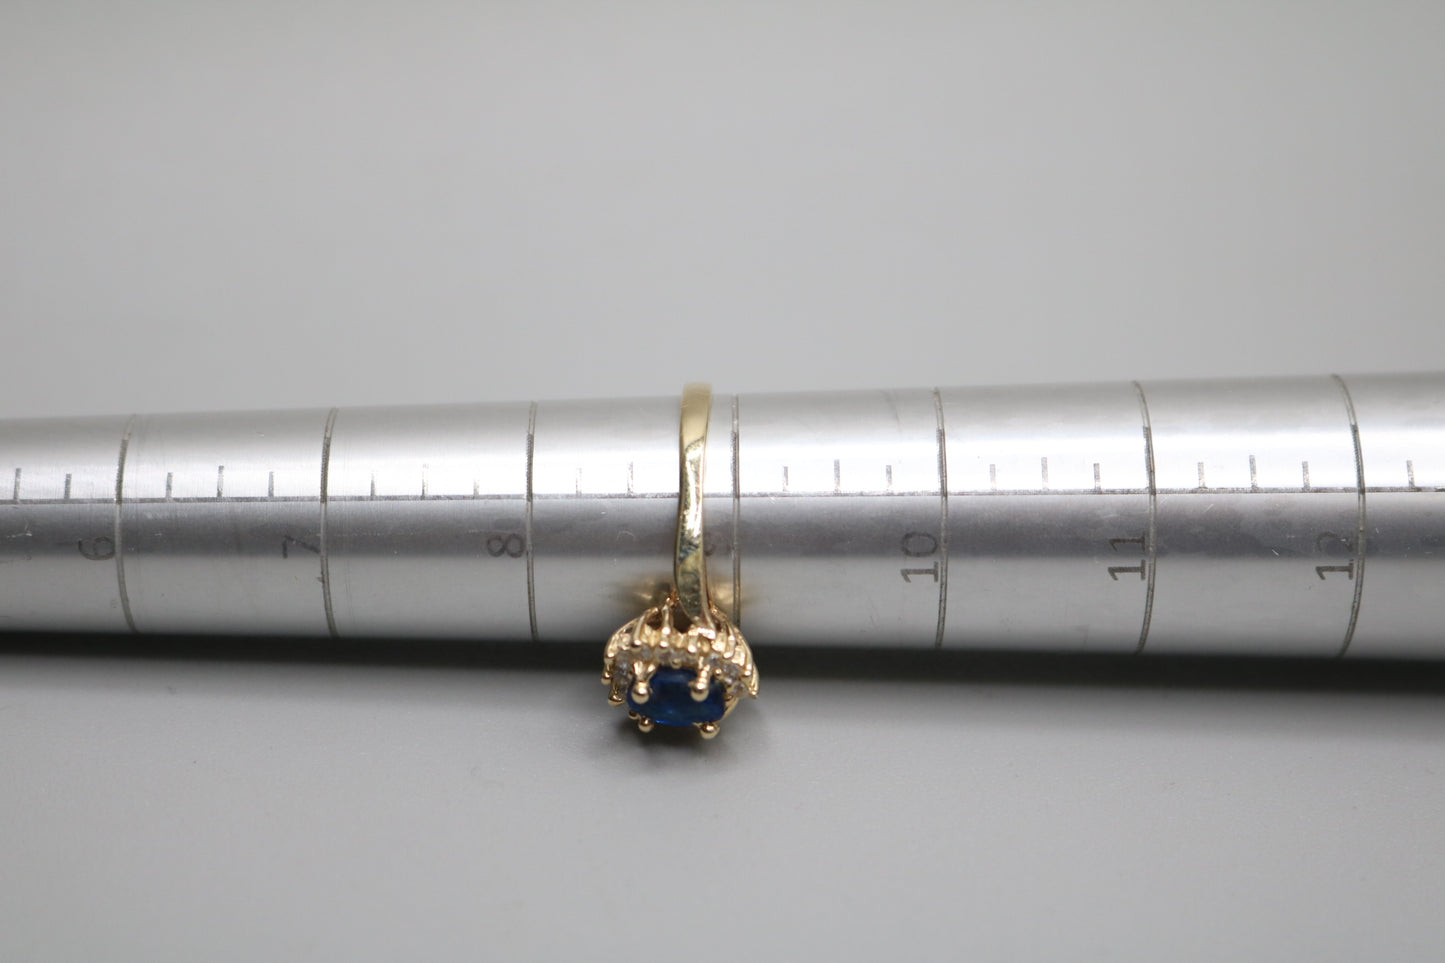 14K Yellow Gold Blue Spinel and Clear Stone Ring (Size 8 3/4)